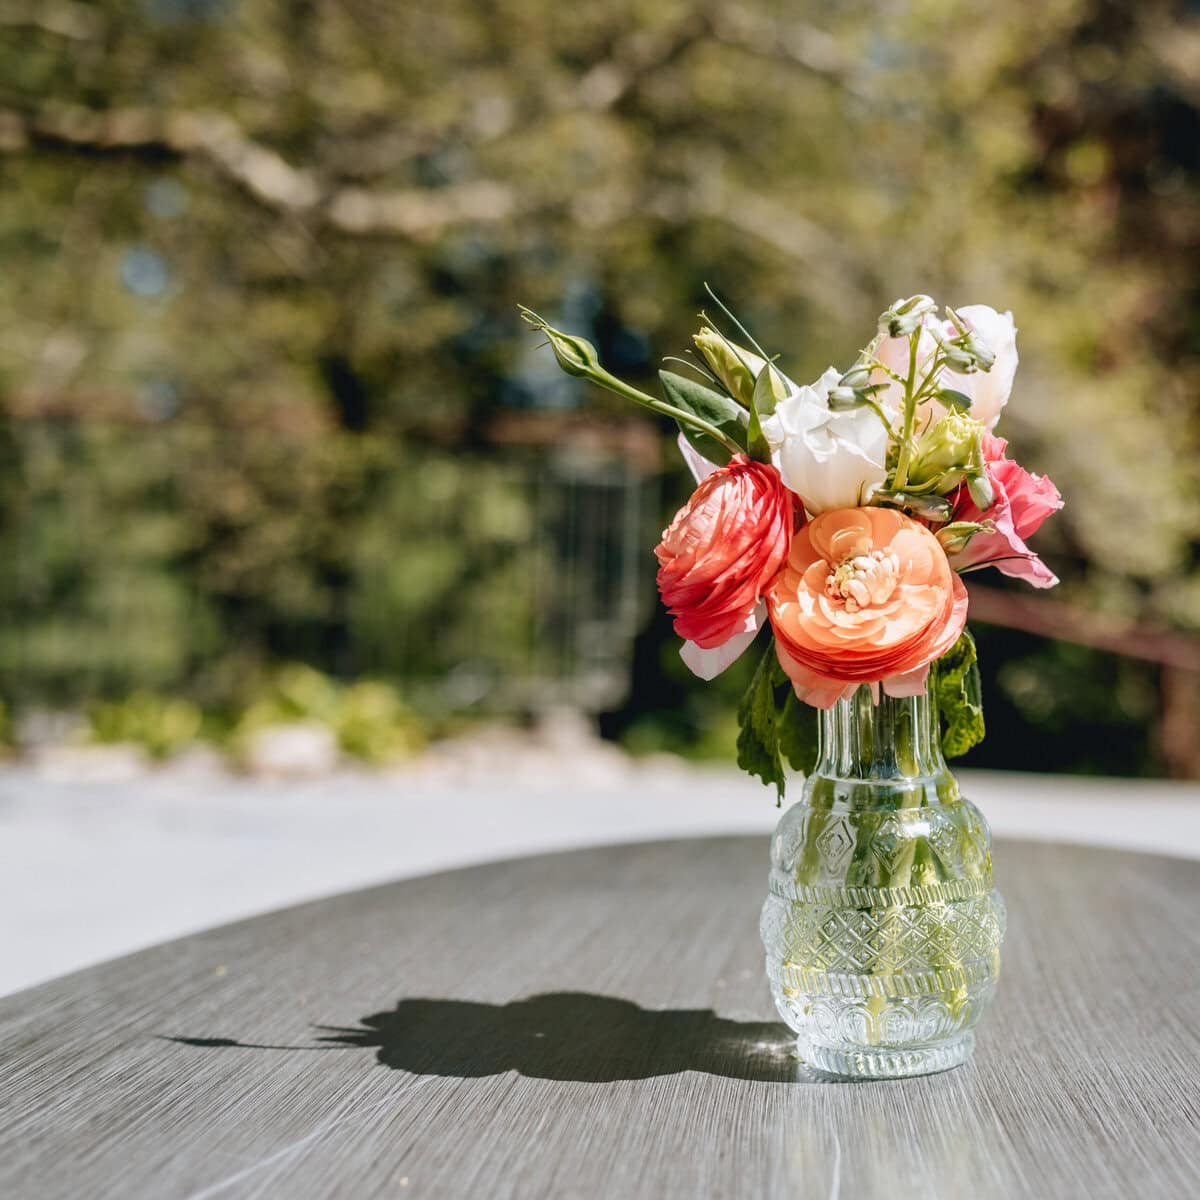 A bouquet of colorful roses in a glass vase on a wooden table outdoors, with natural sunlight creating a shadow of the vase on the table.